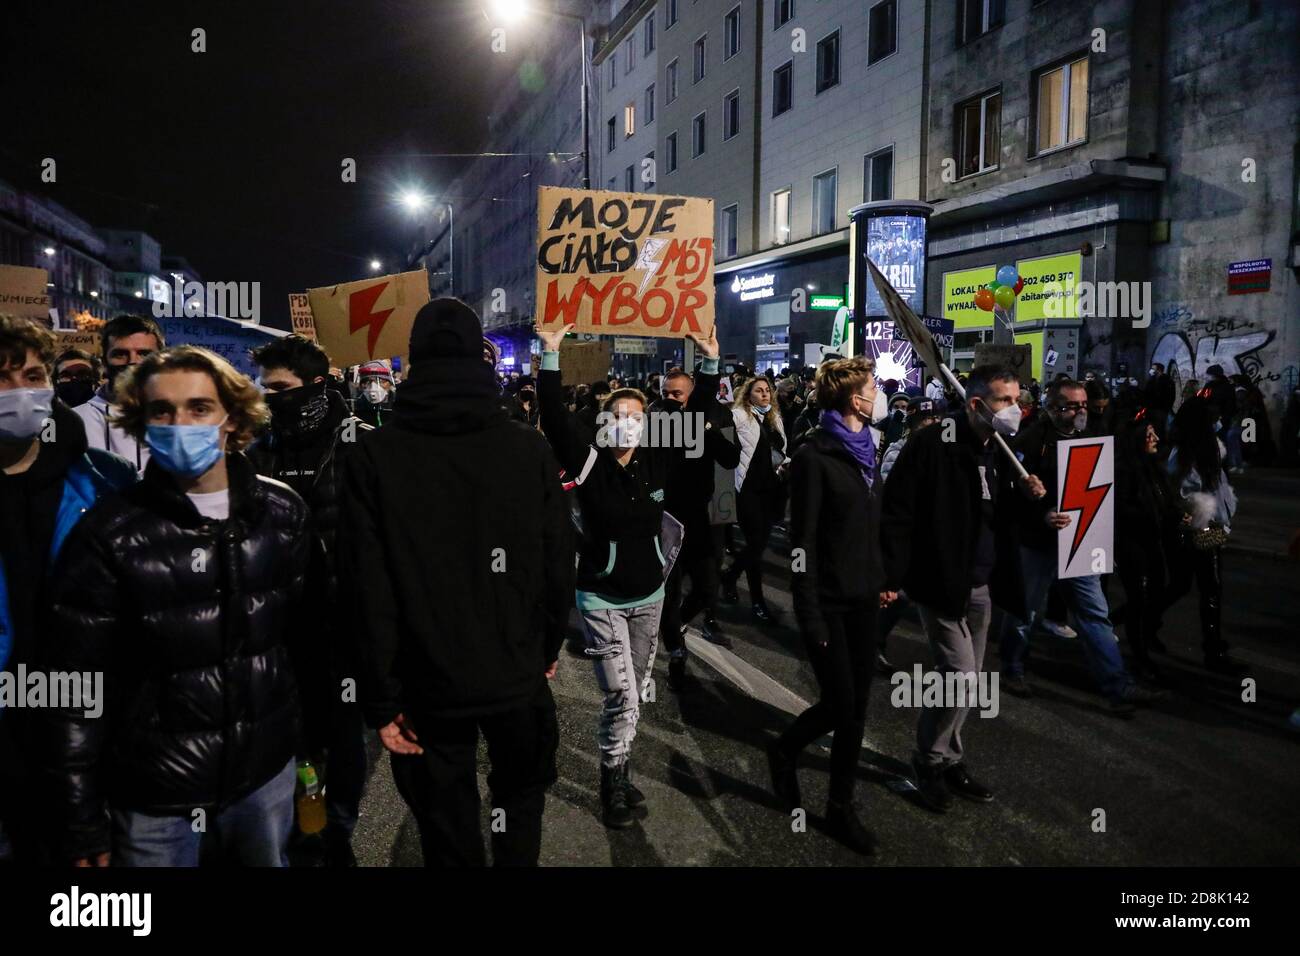 Warsaw, Poland. 30th Oct, 2020. October 30, 2020, Warsaw, Poland: Today, over two hundred thousand people protested in the streets of Warsaw over the decision of the Constitutional Tribunal regarding the Anti-Abortion Act.In the photo: Credit: Grzegorz Banaszak/ZUMA Wire/Alamy Live News Stock Photo